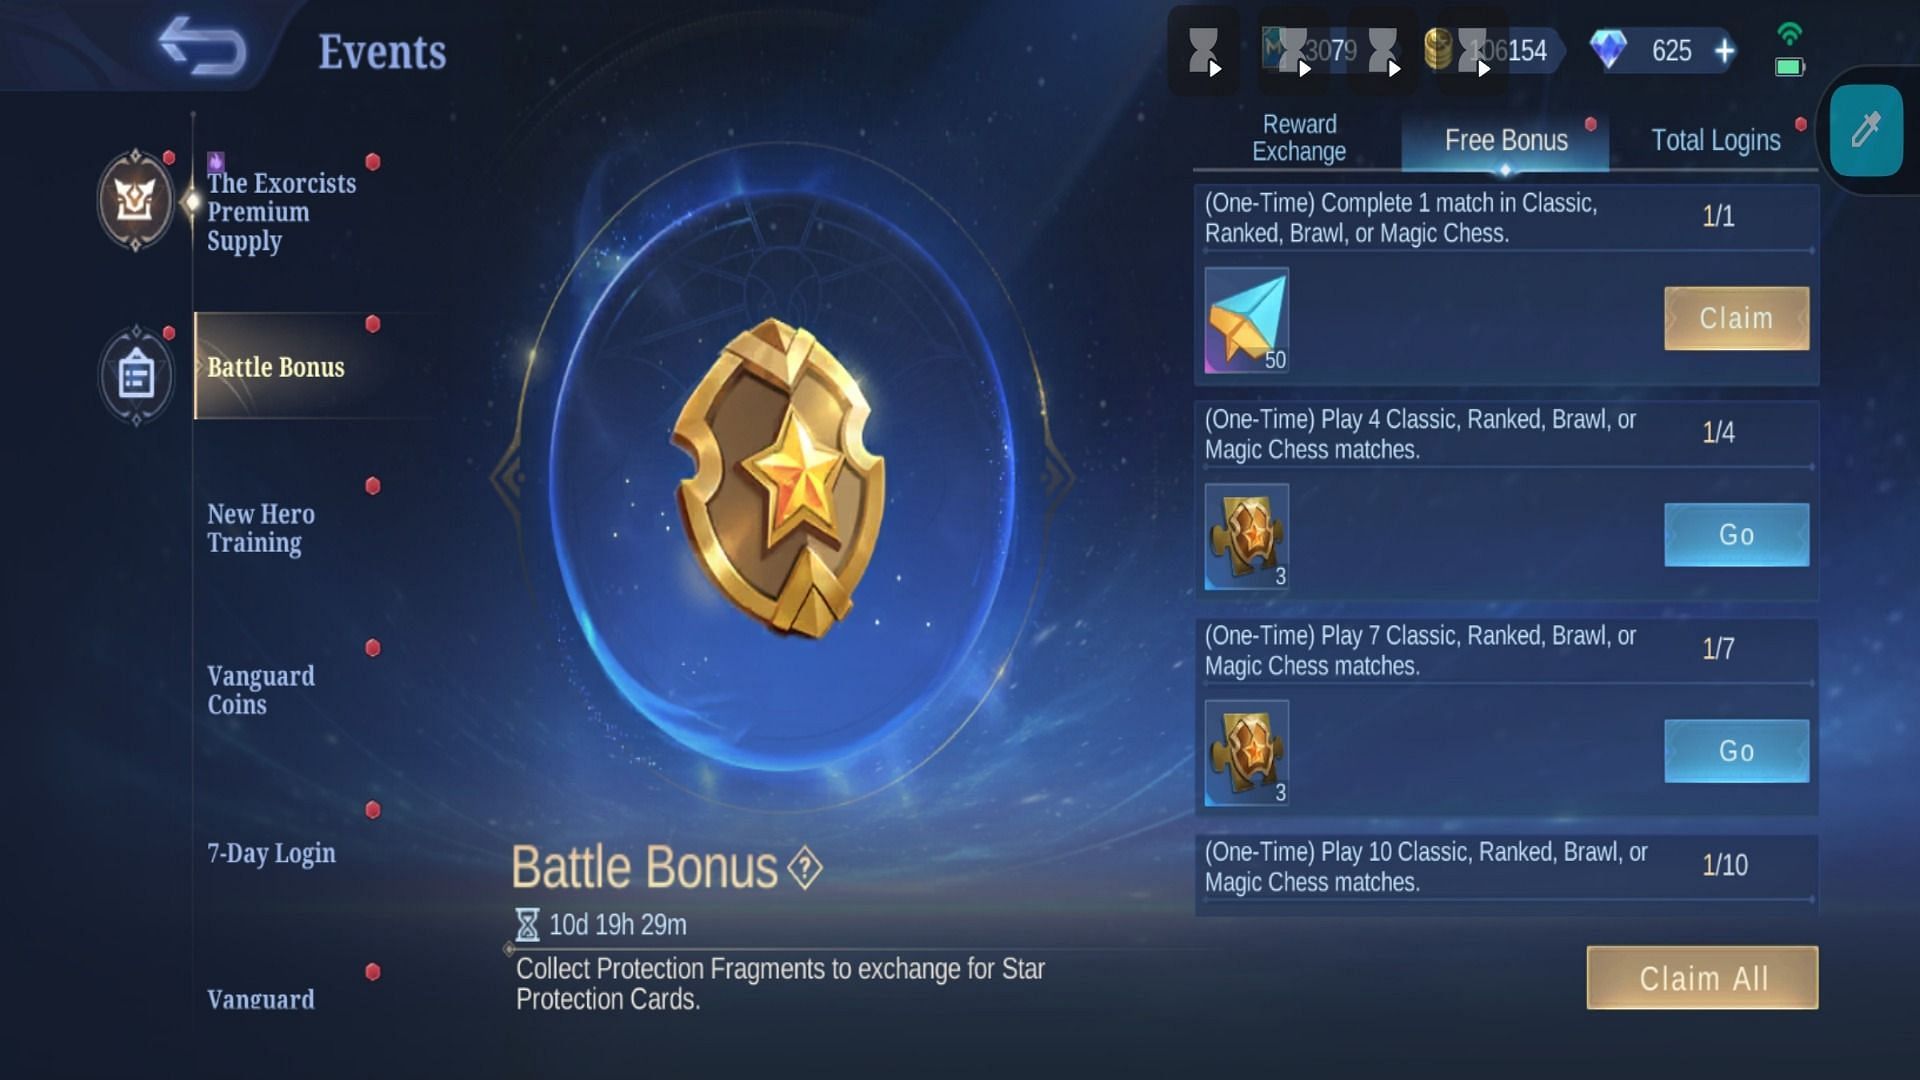 You can earn up to 150 Paper Planes from daily logins (Image via Moonton Games)